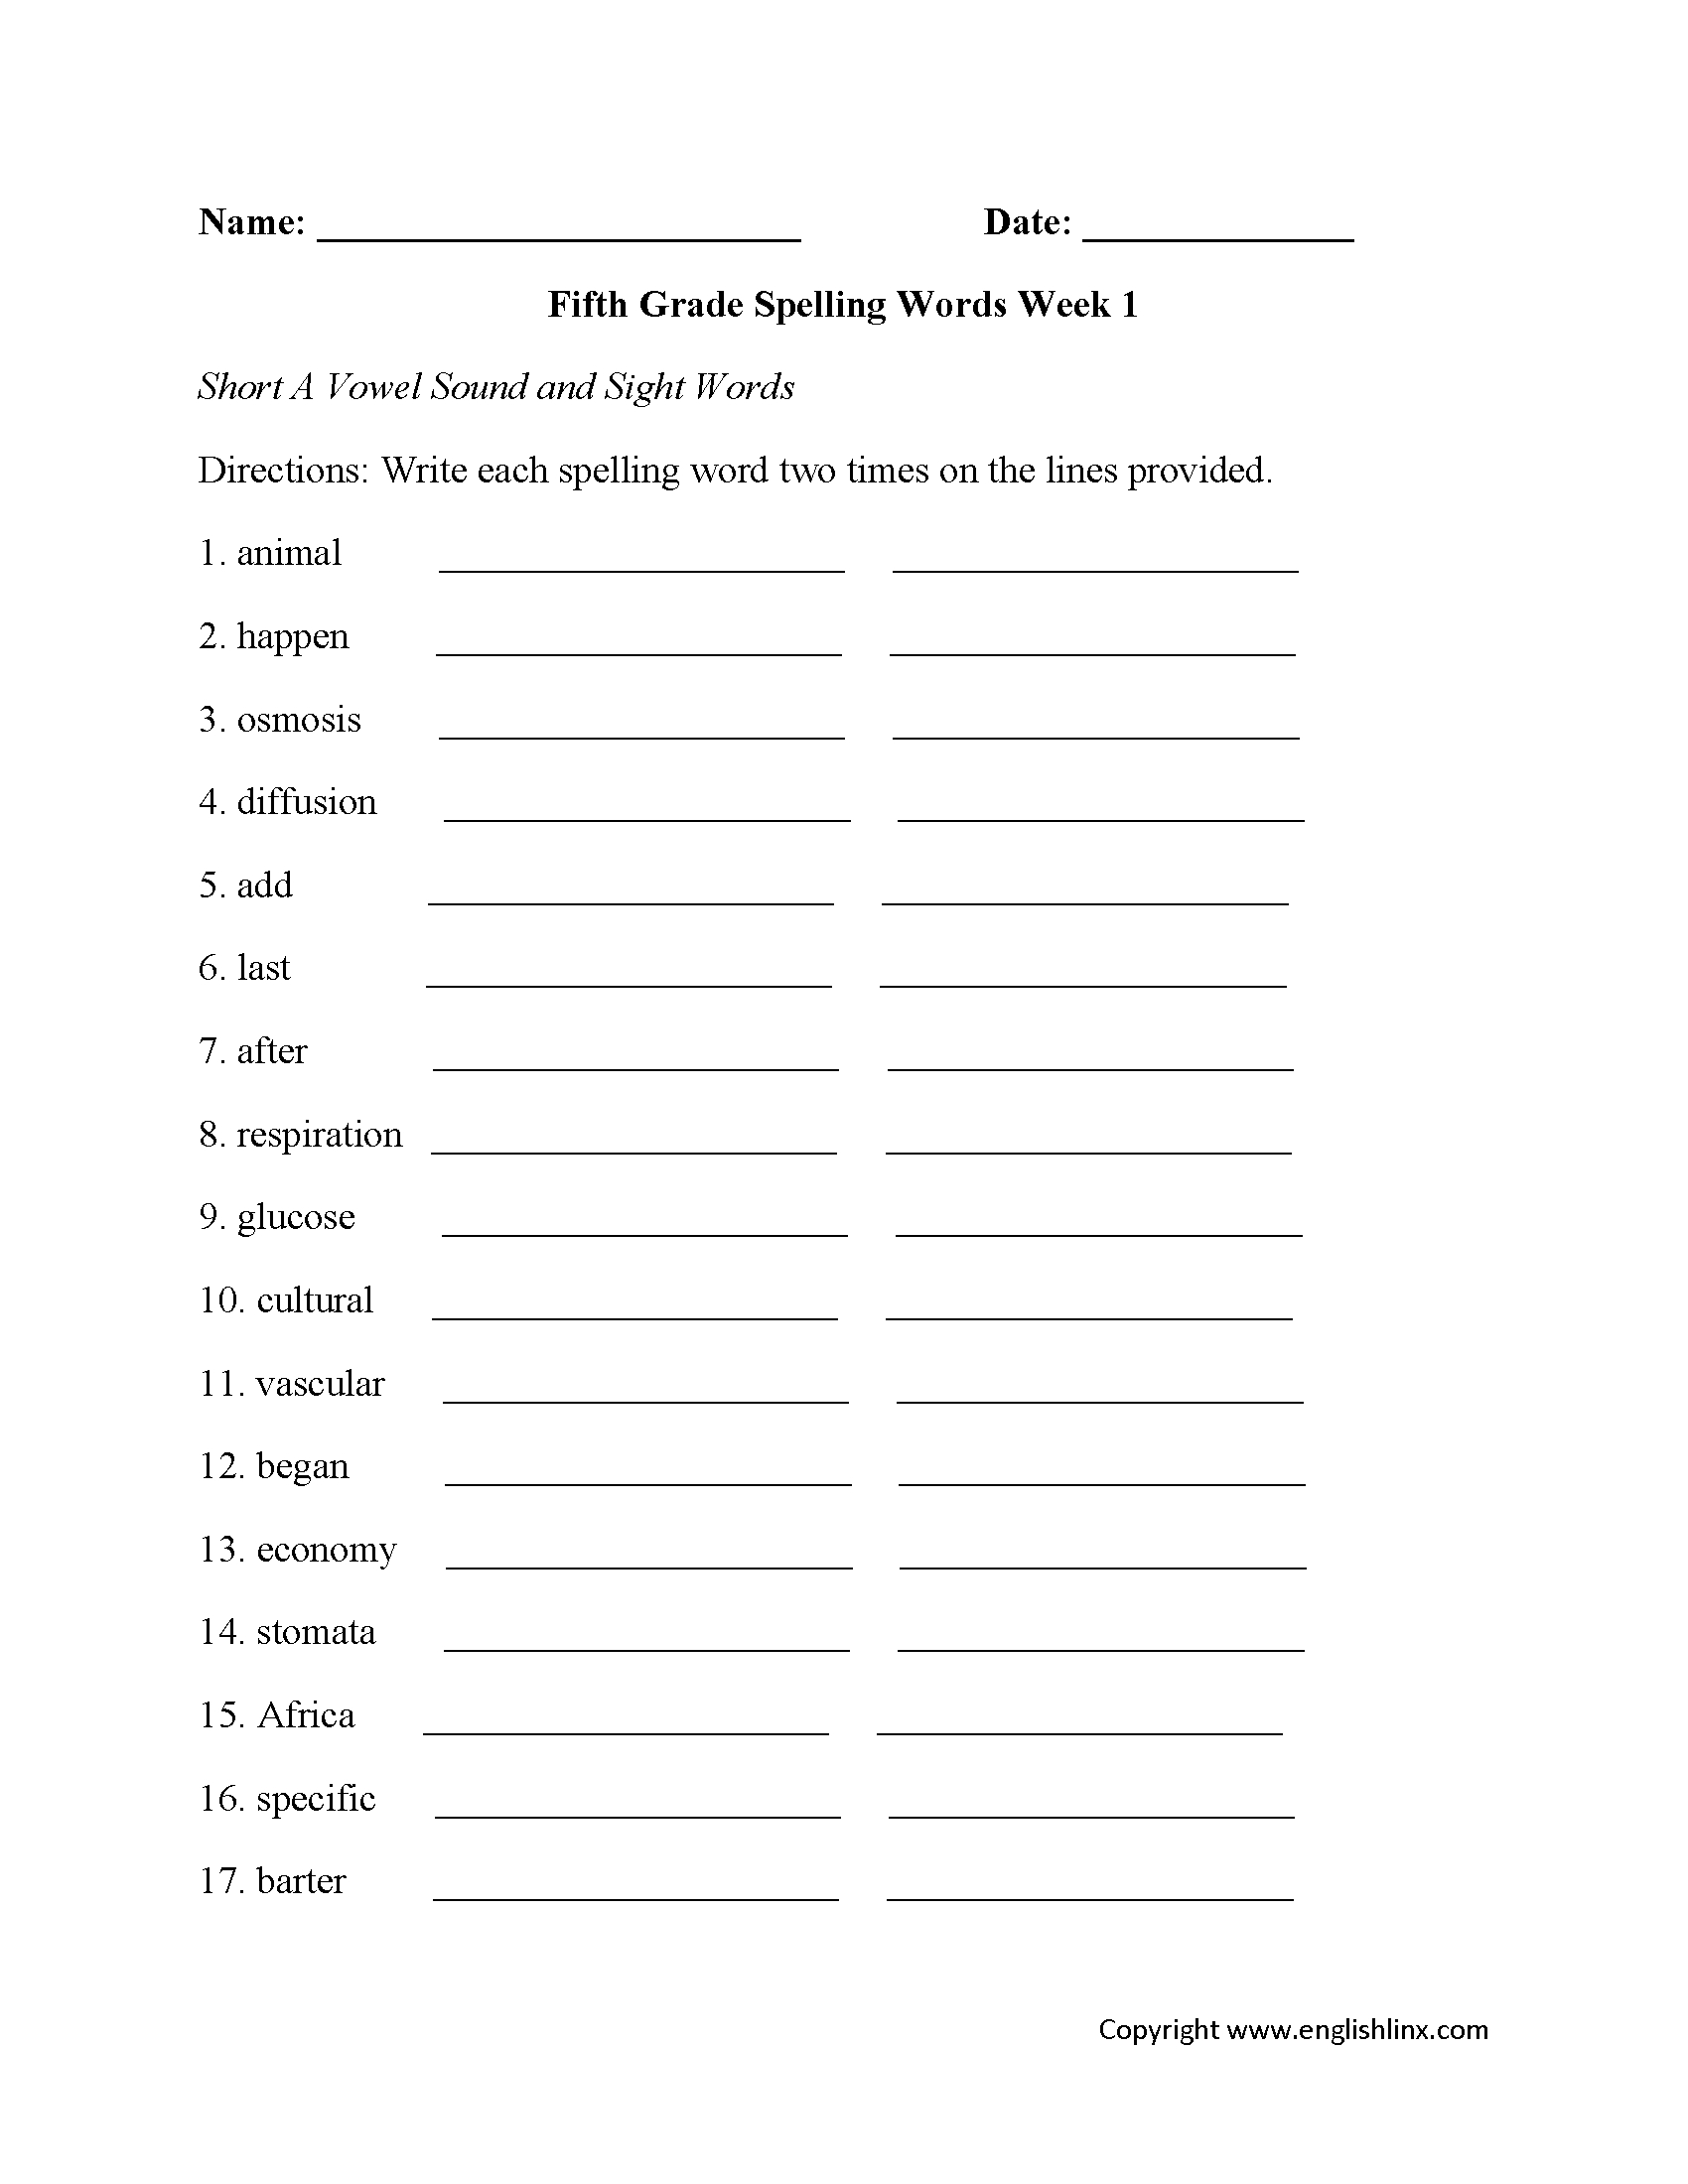 Free Printable Spelling Worksheets For 5Th Grade Free Printable